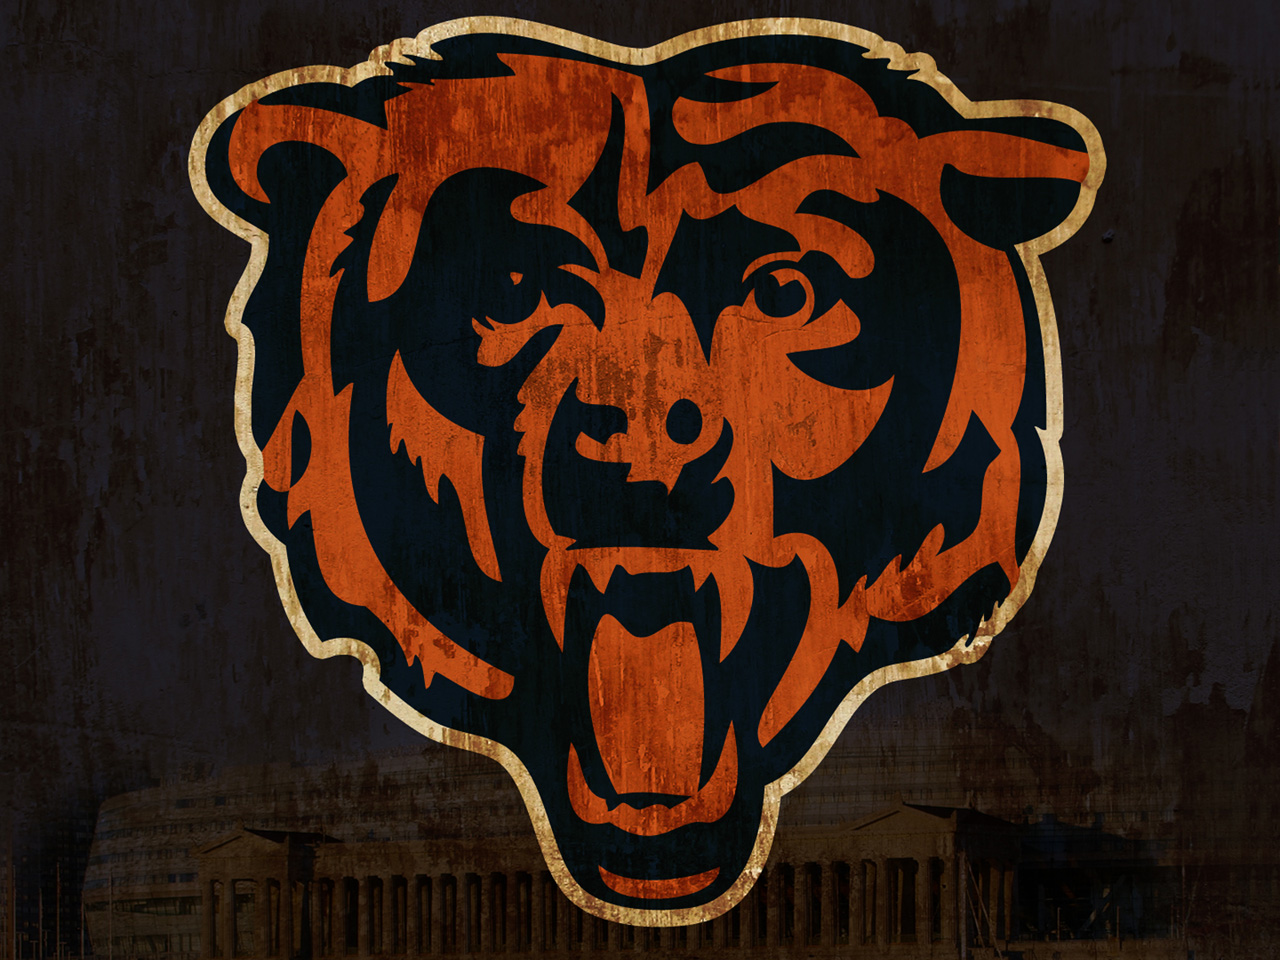 New Chicago Bears background Chicago Bears wallpapers 1280x960